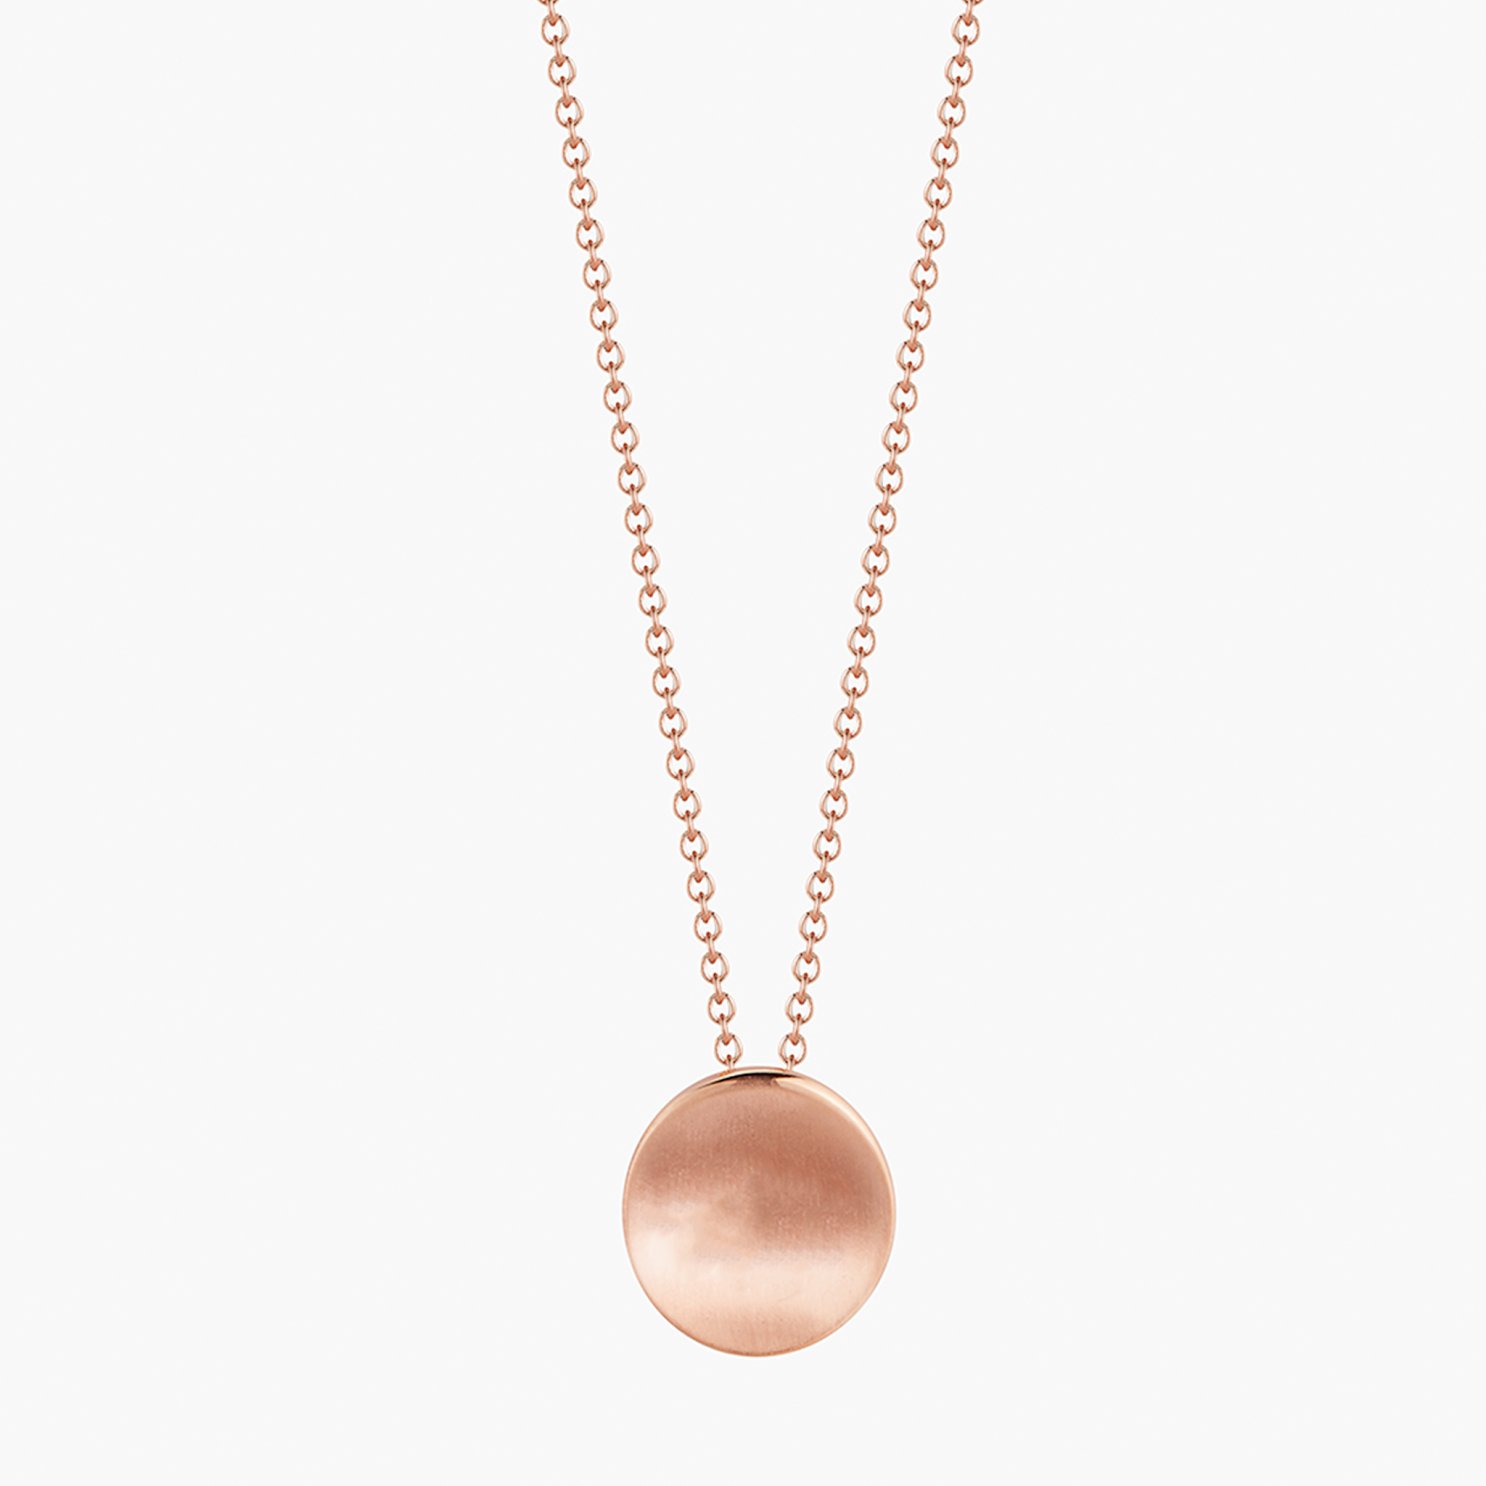 Organic Petite Necklace in Rose Gold